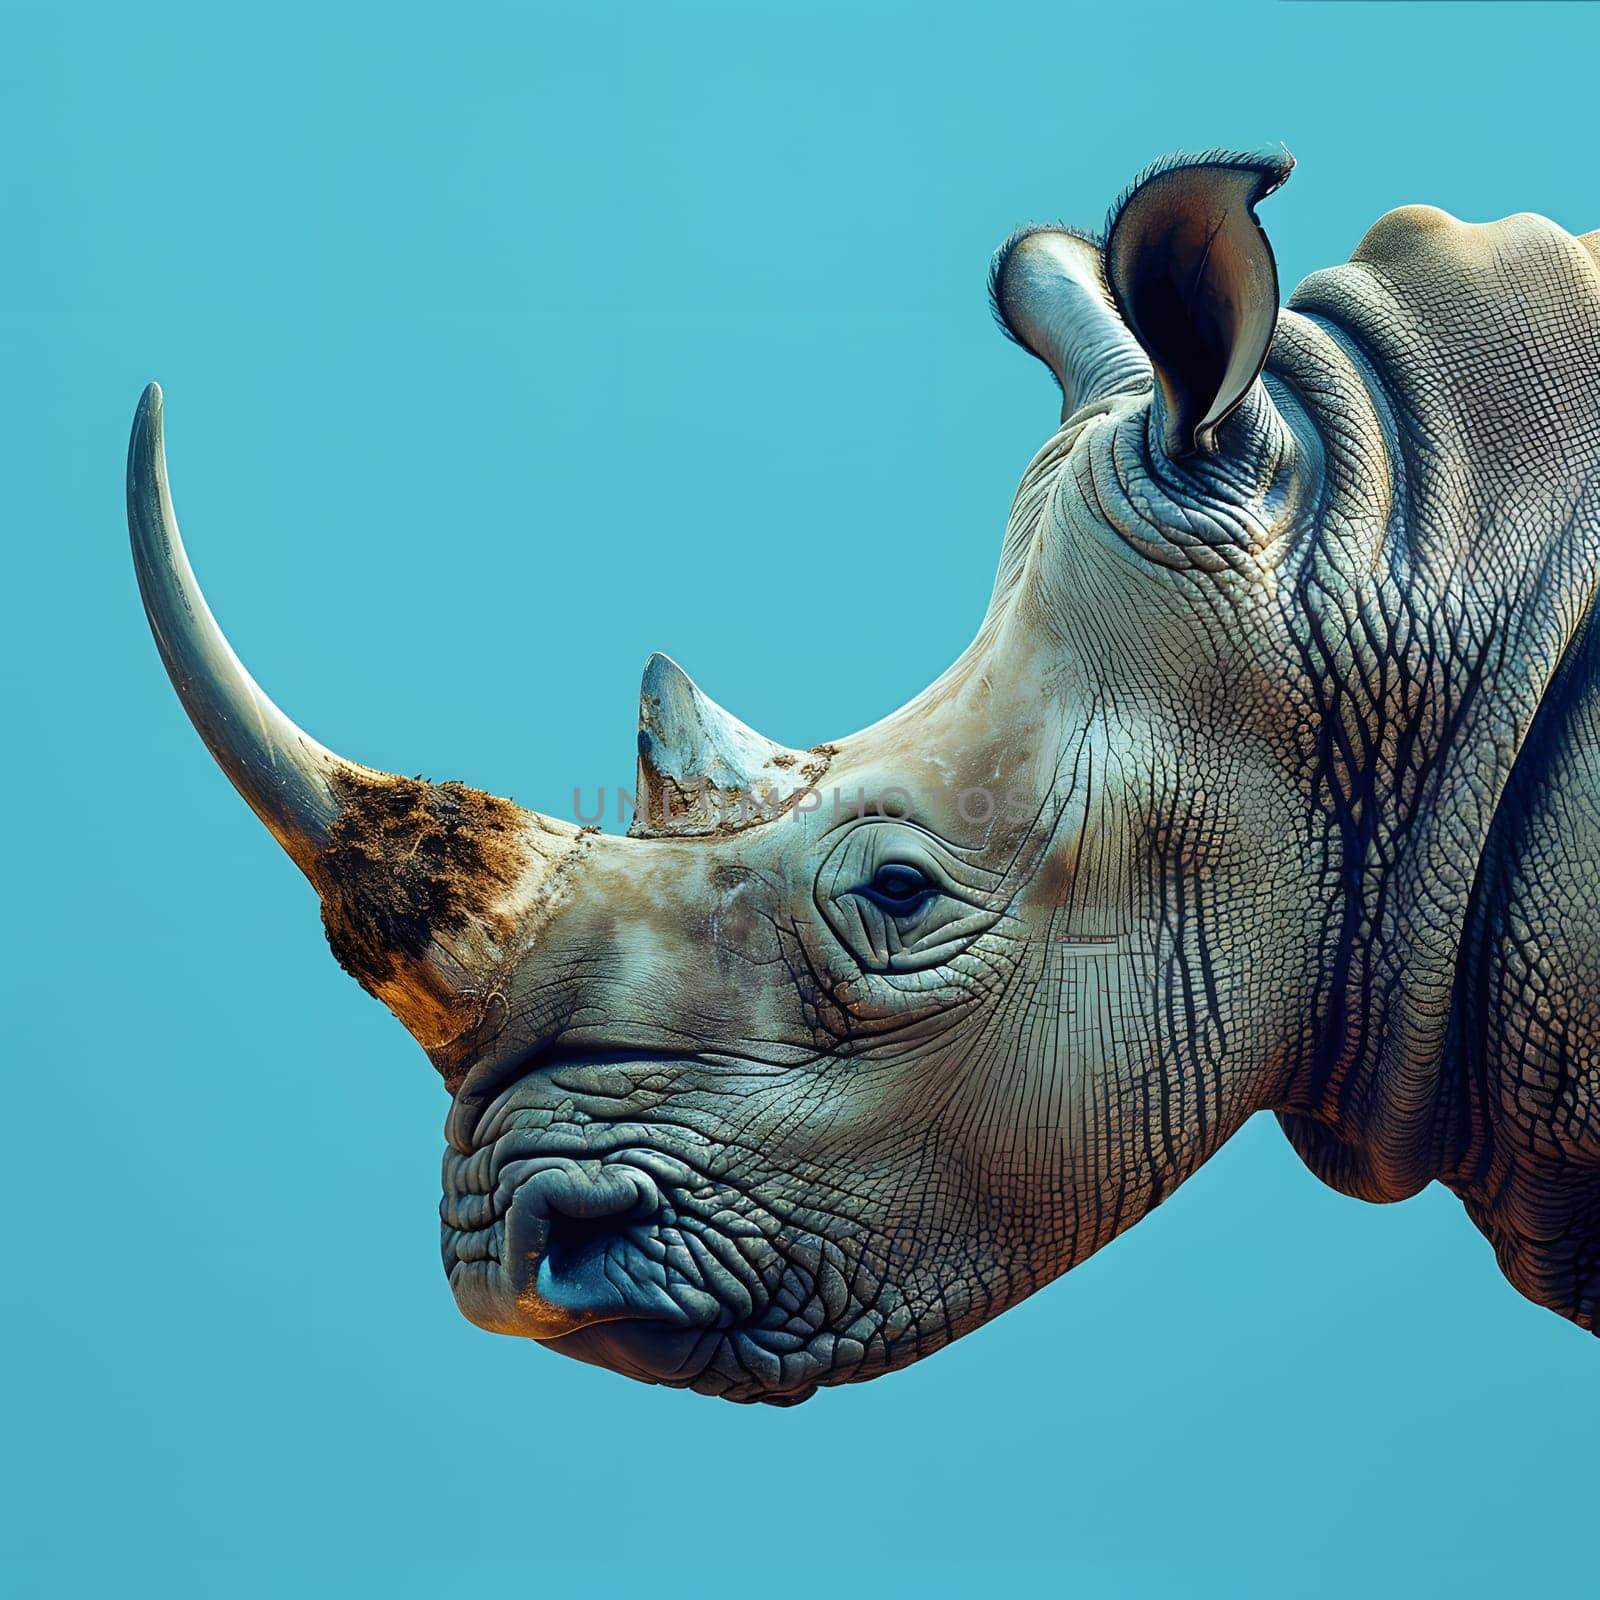 Close up of a Black Rhinoceros head against a clear blue sky, showcasing its powerful jaw, horn, and distinctive snout as a terrestrial animal